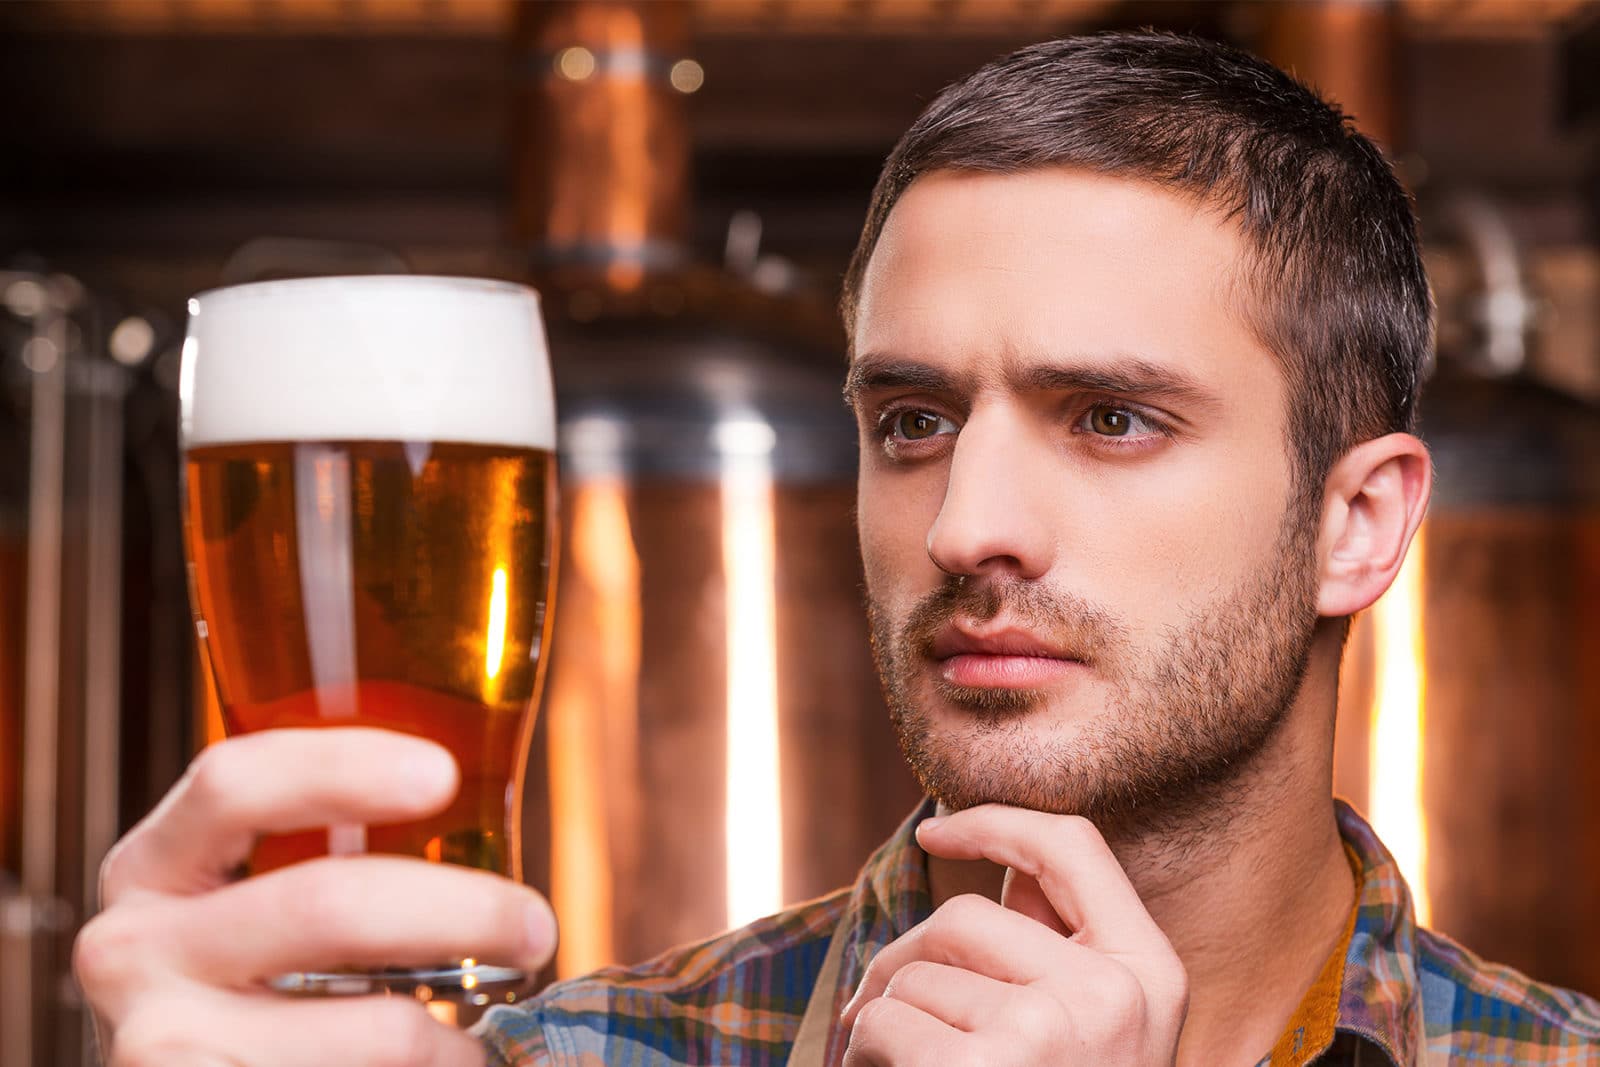 Does Alcohol Cause Hair Loss?